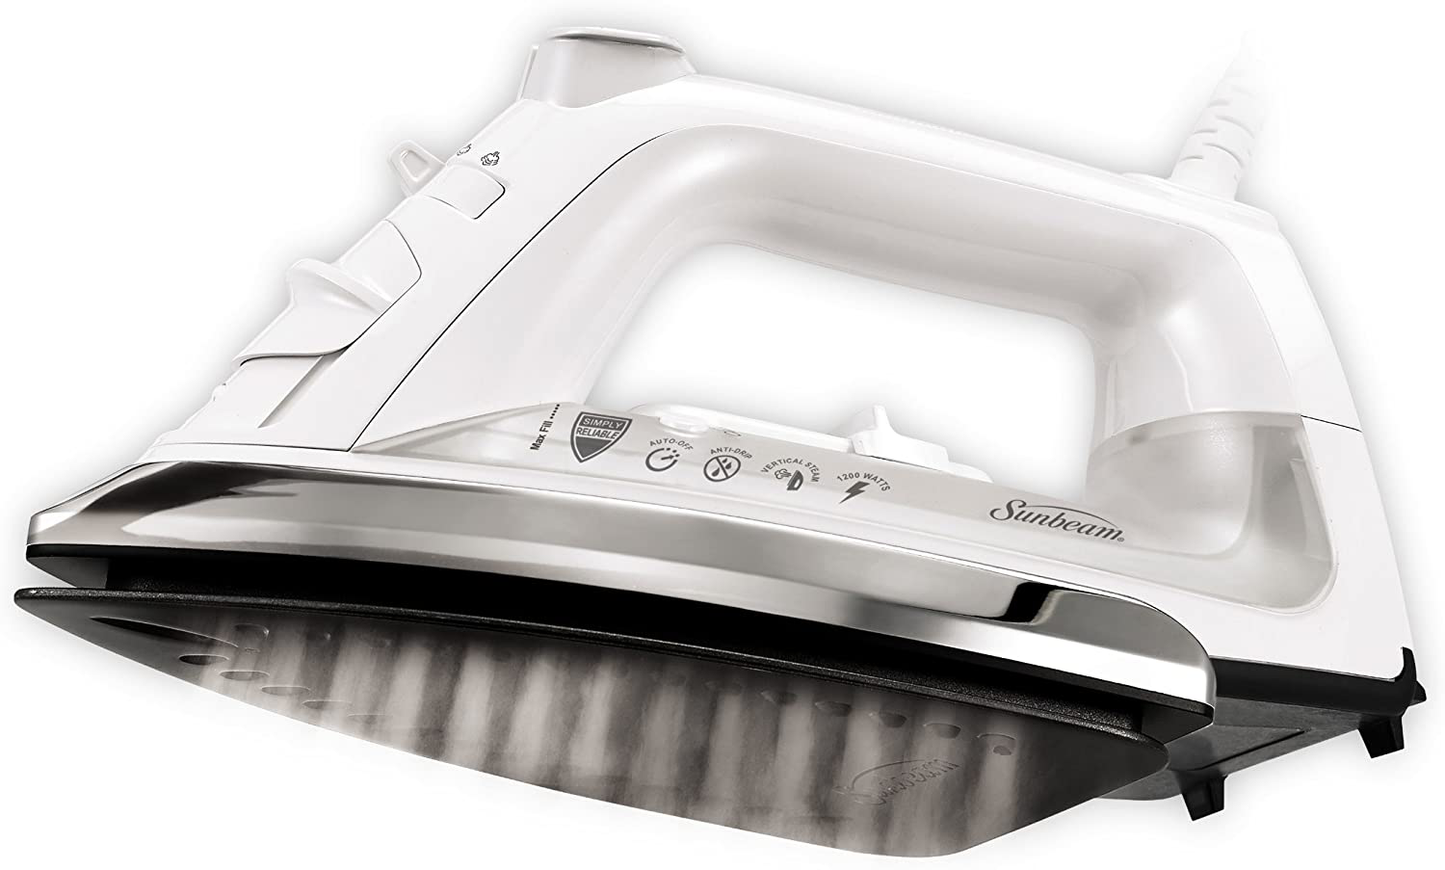 Sunbeam Classic 1200 Watt Mid-size Anti-Drip Non-Stick Soleplate Iron with Shot of Steam/Vertical Shot feature and 8' 360-degree Swivel Cord, White/Clear, GCSBCL-317-000